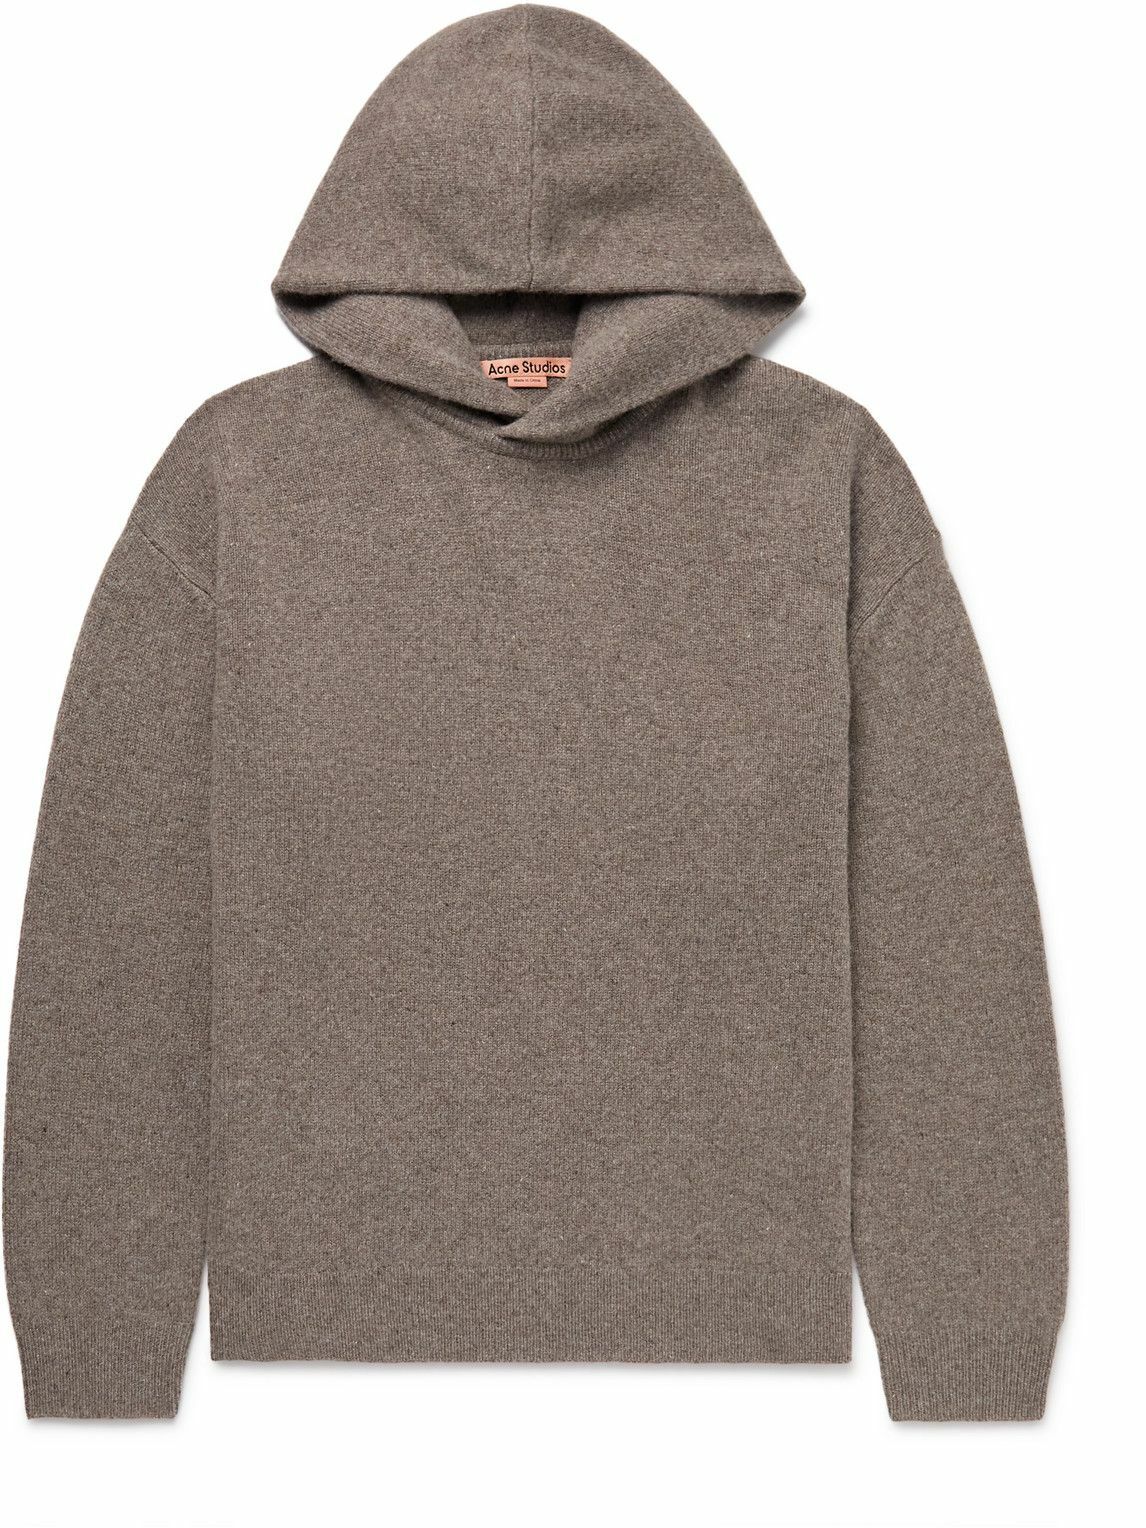 Photo: Acne Studios - Kristen Wool and Cashmere-Blend Hoodie - Brown